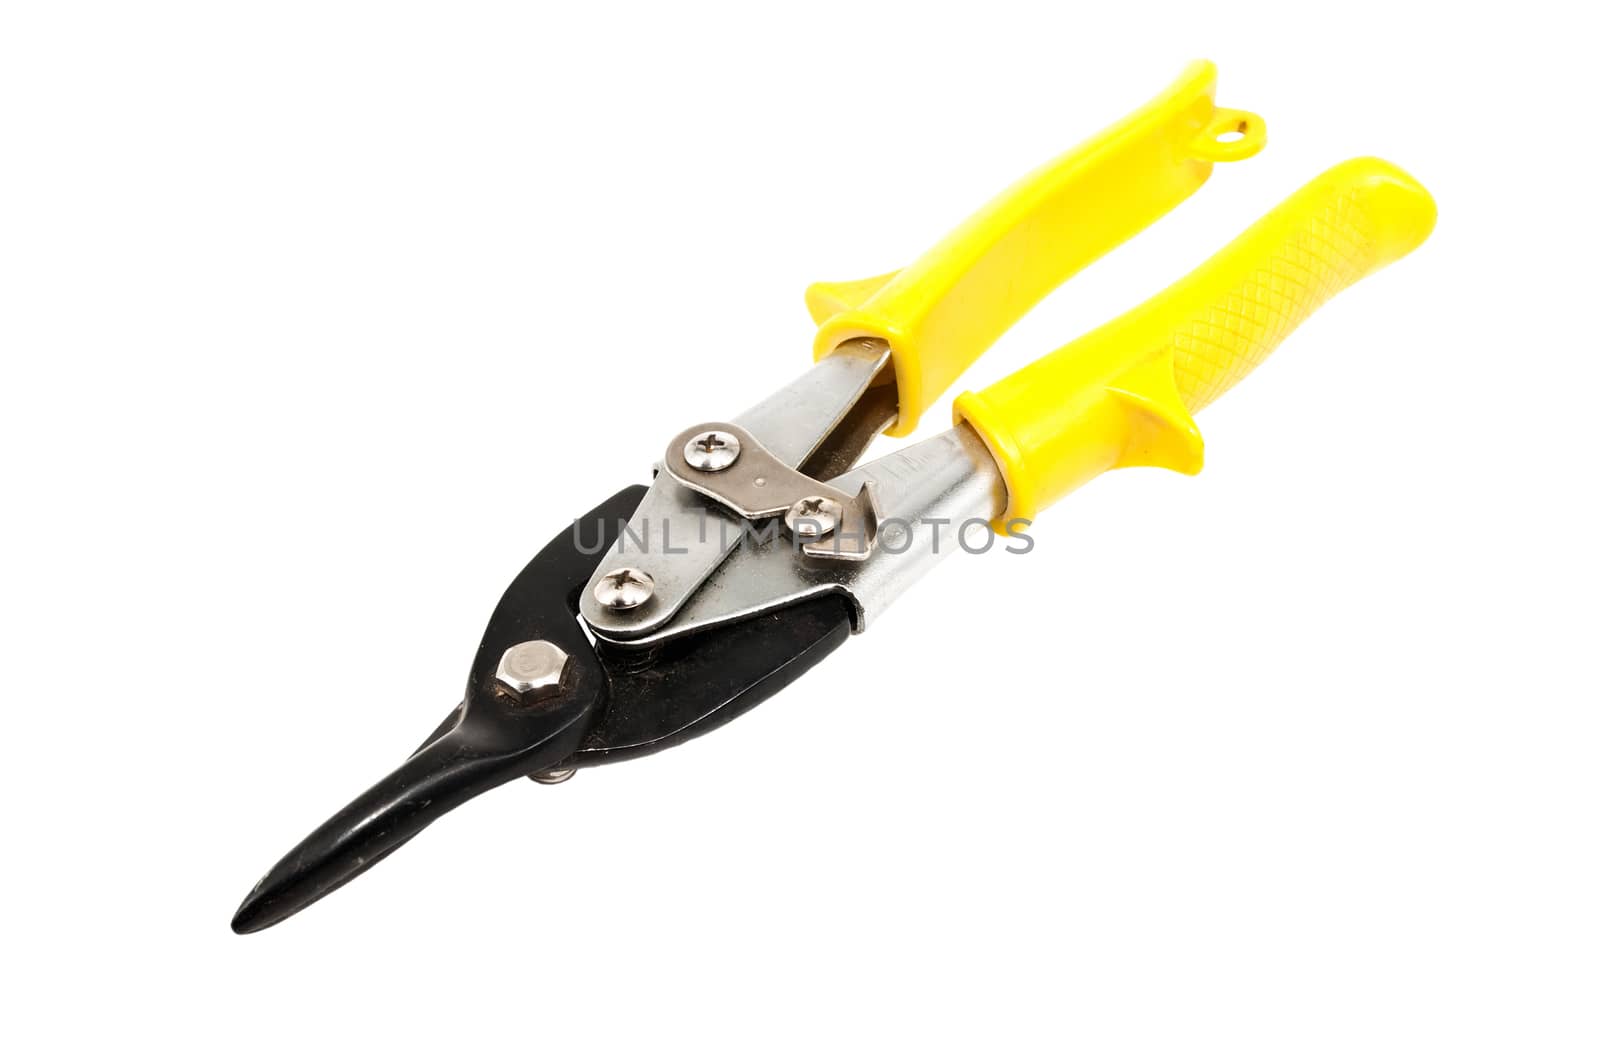 shears for cutting sheet metal on a white background